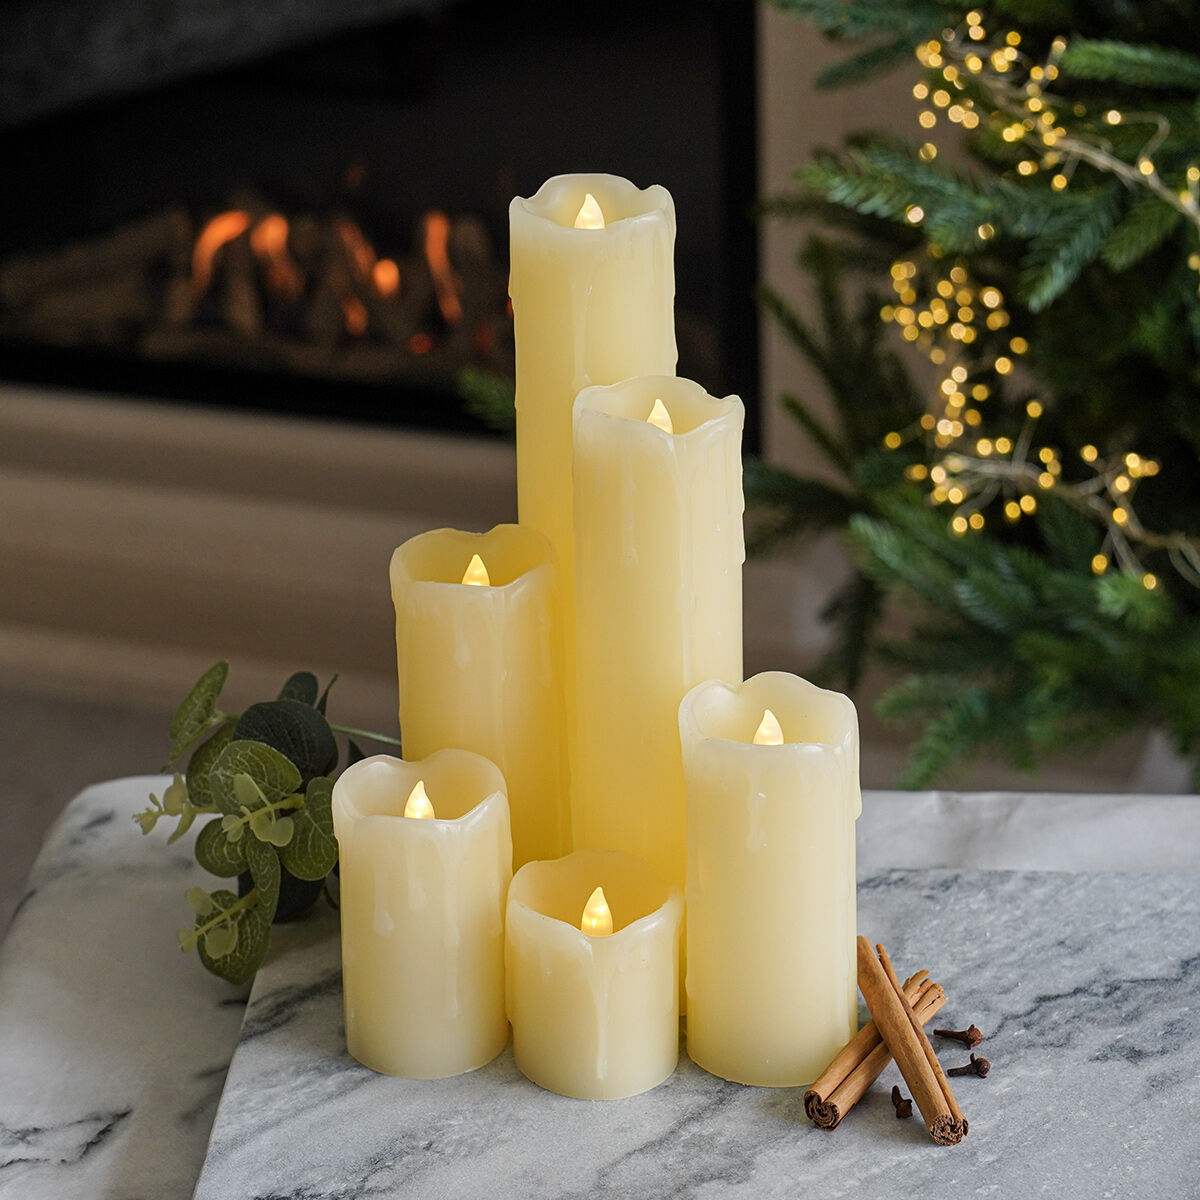 6 Battery Flickering Dripping Wax Pillar LED Candles image 3